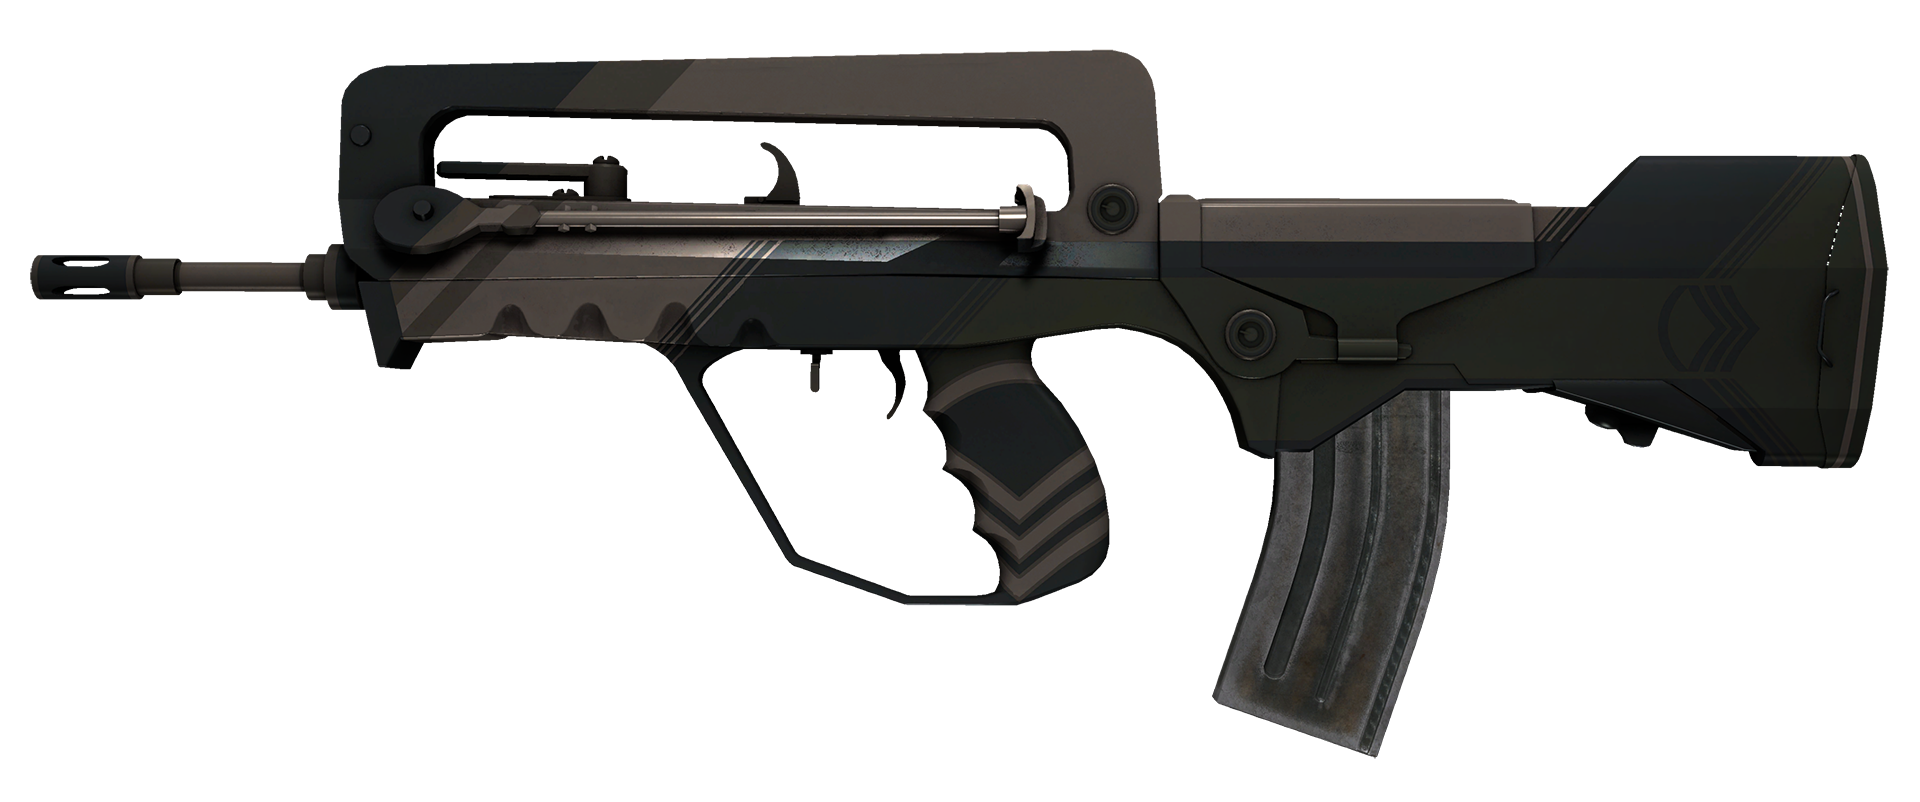 FAMAS Colony cs go skin download the last version for windows